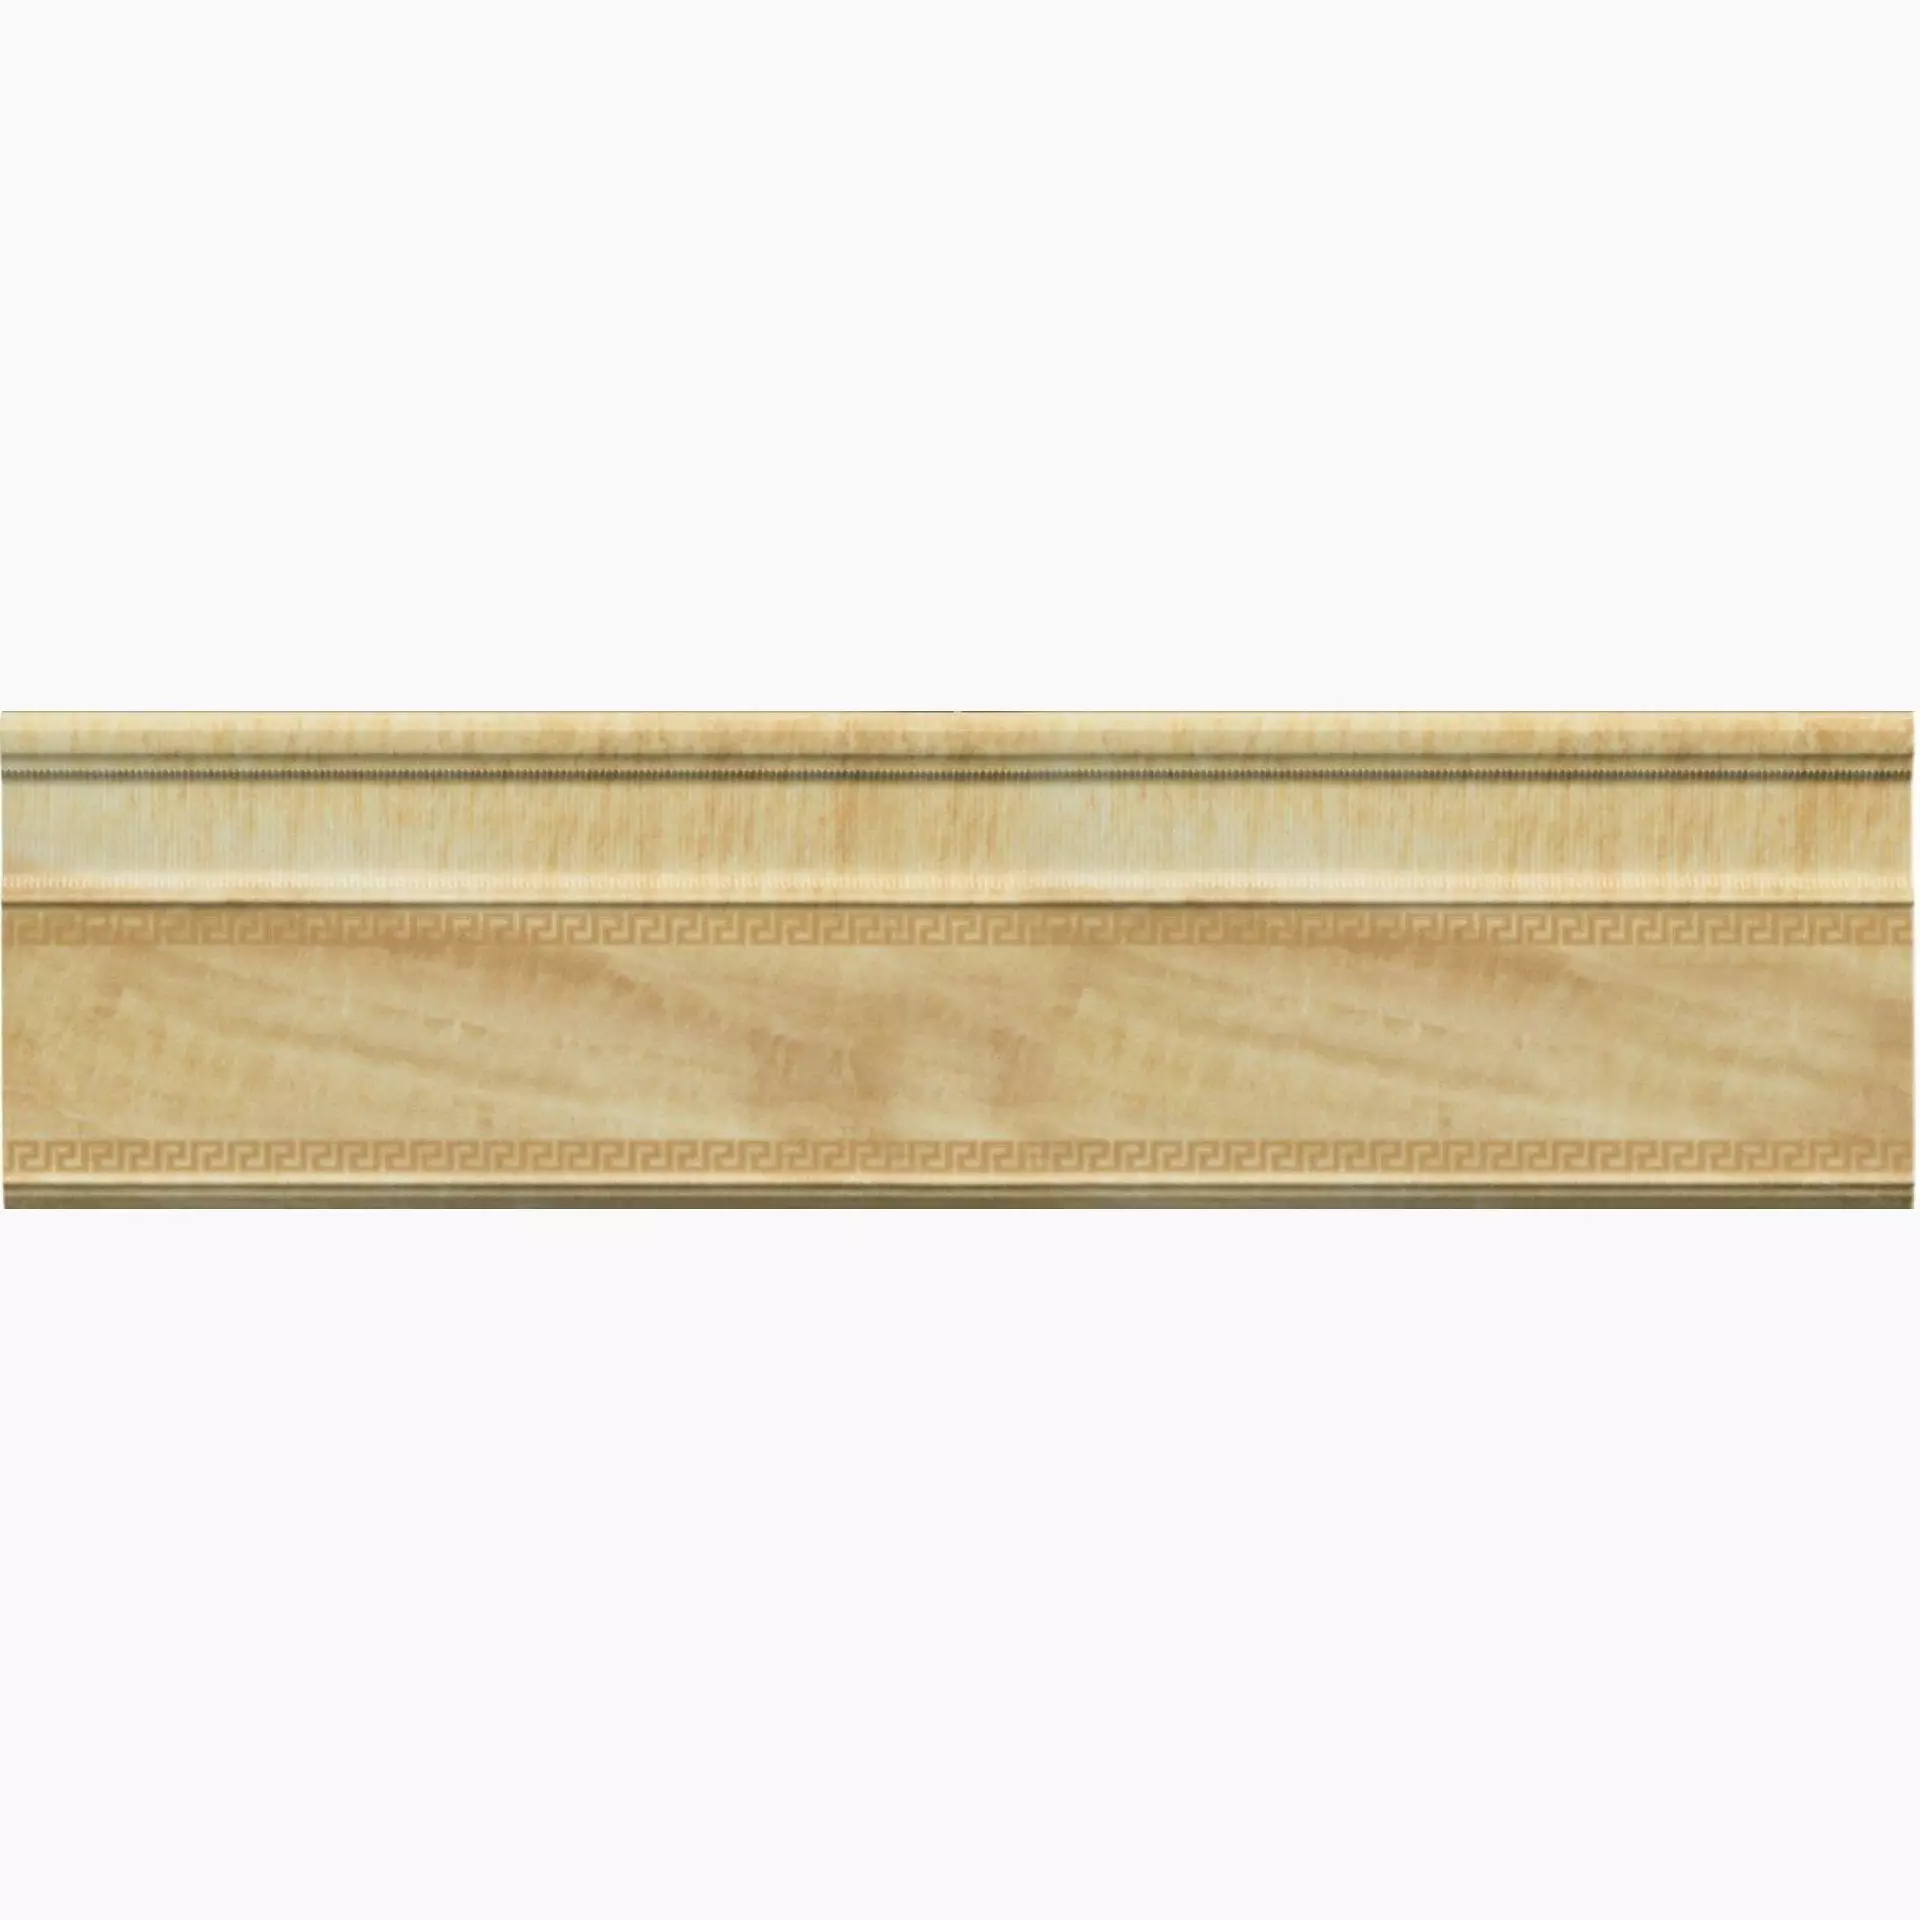 Versace Marble Oro Naturale Skirting board G0240792 15x58,5cm rectified